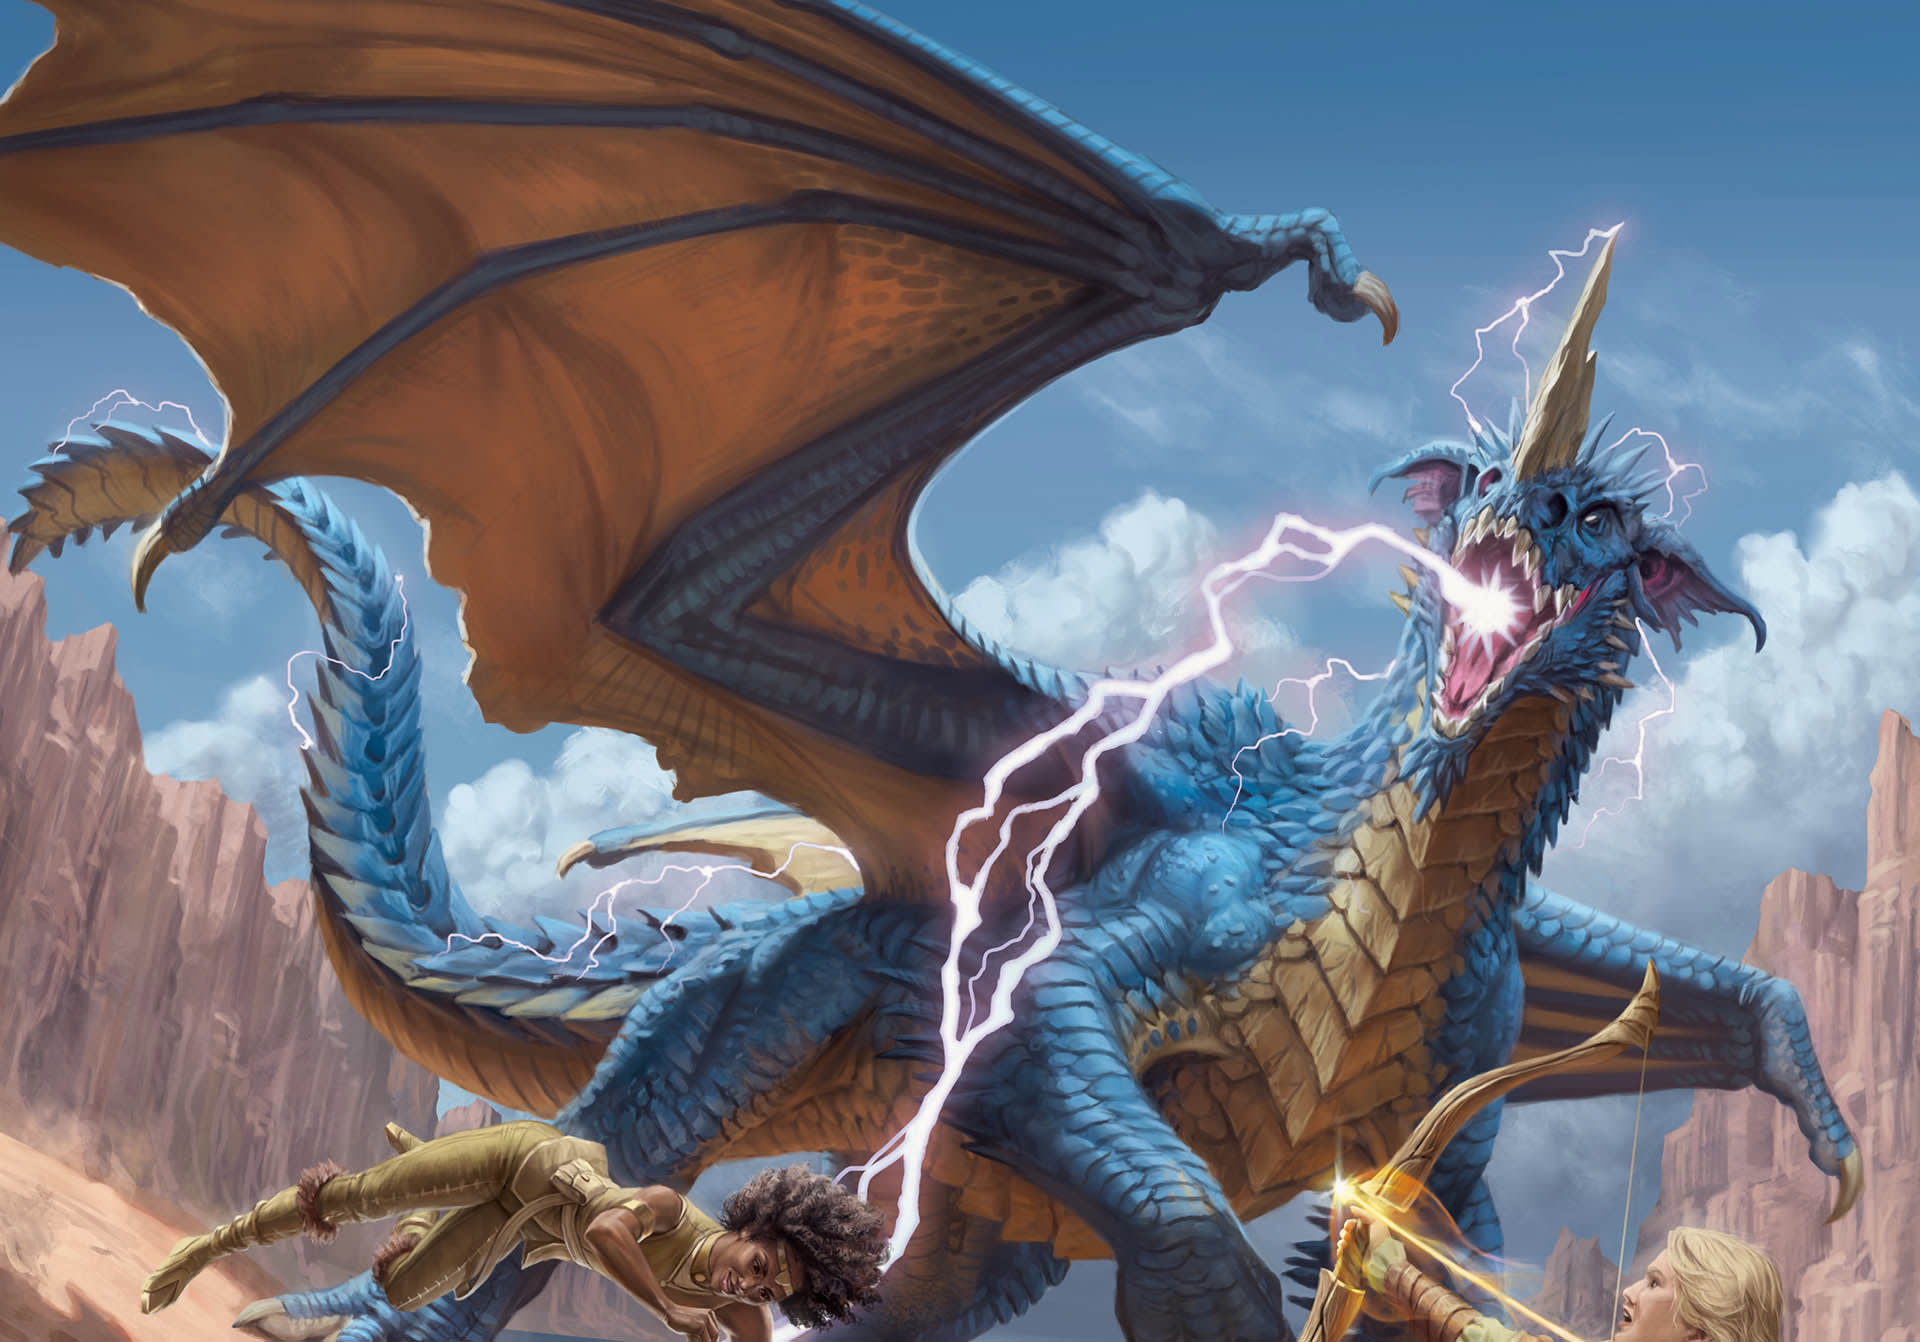 LEGO Dungeons & Dragons set confirmed, likely coming 2024